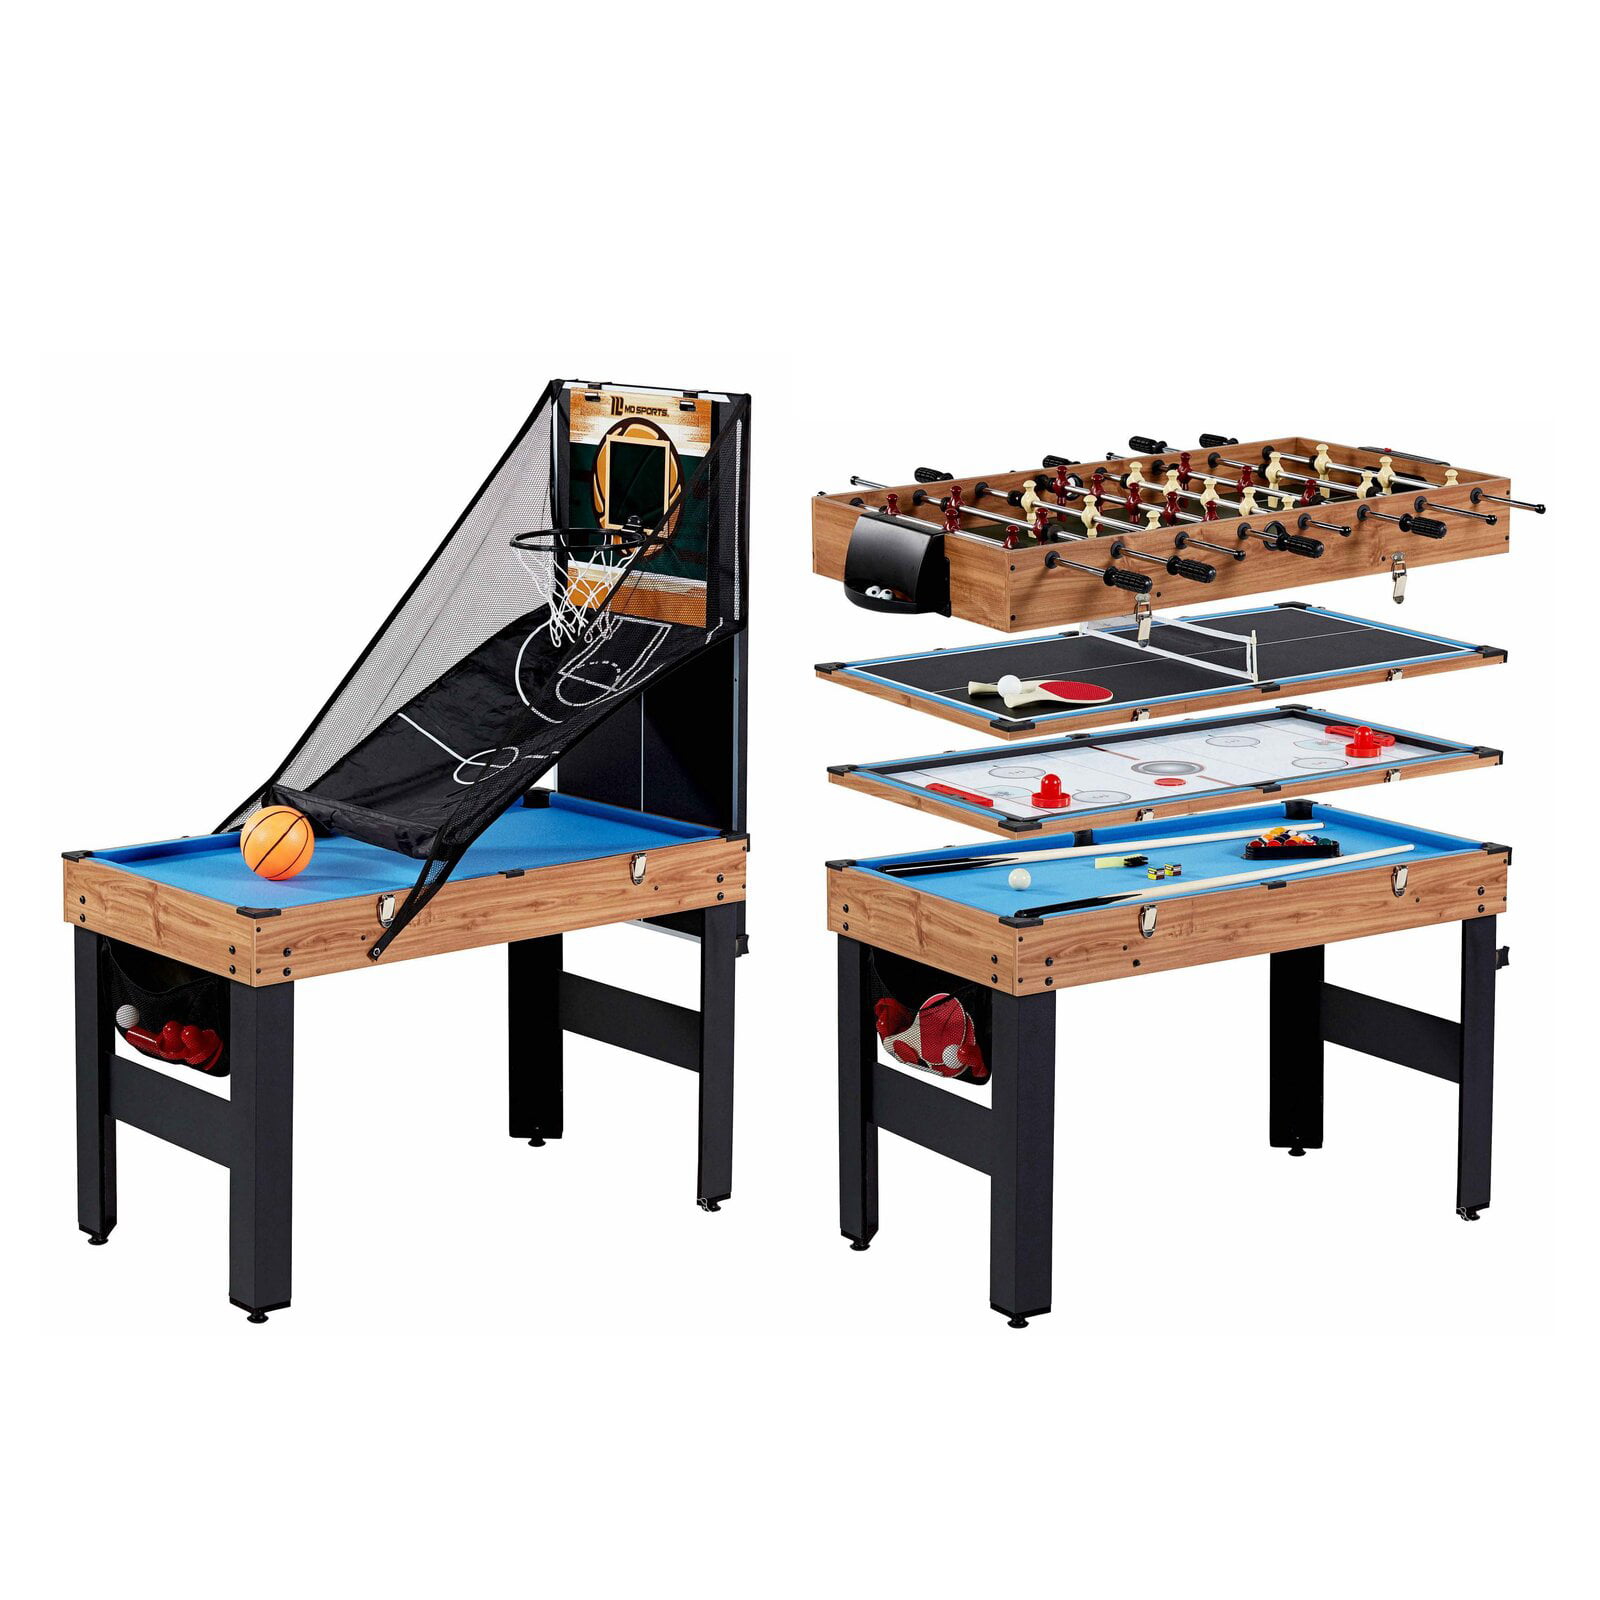 Multi Games Table Buyer's Guide